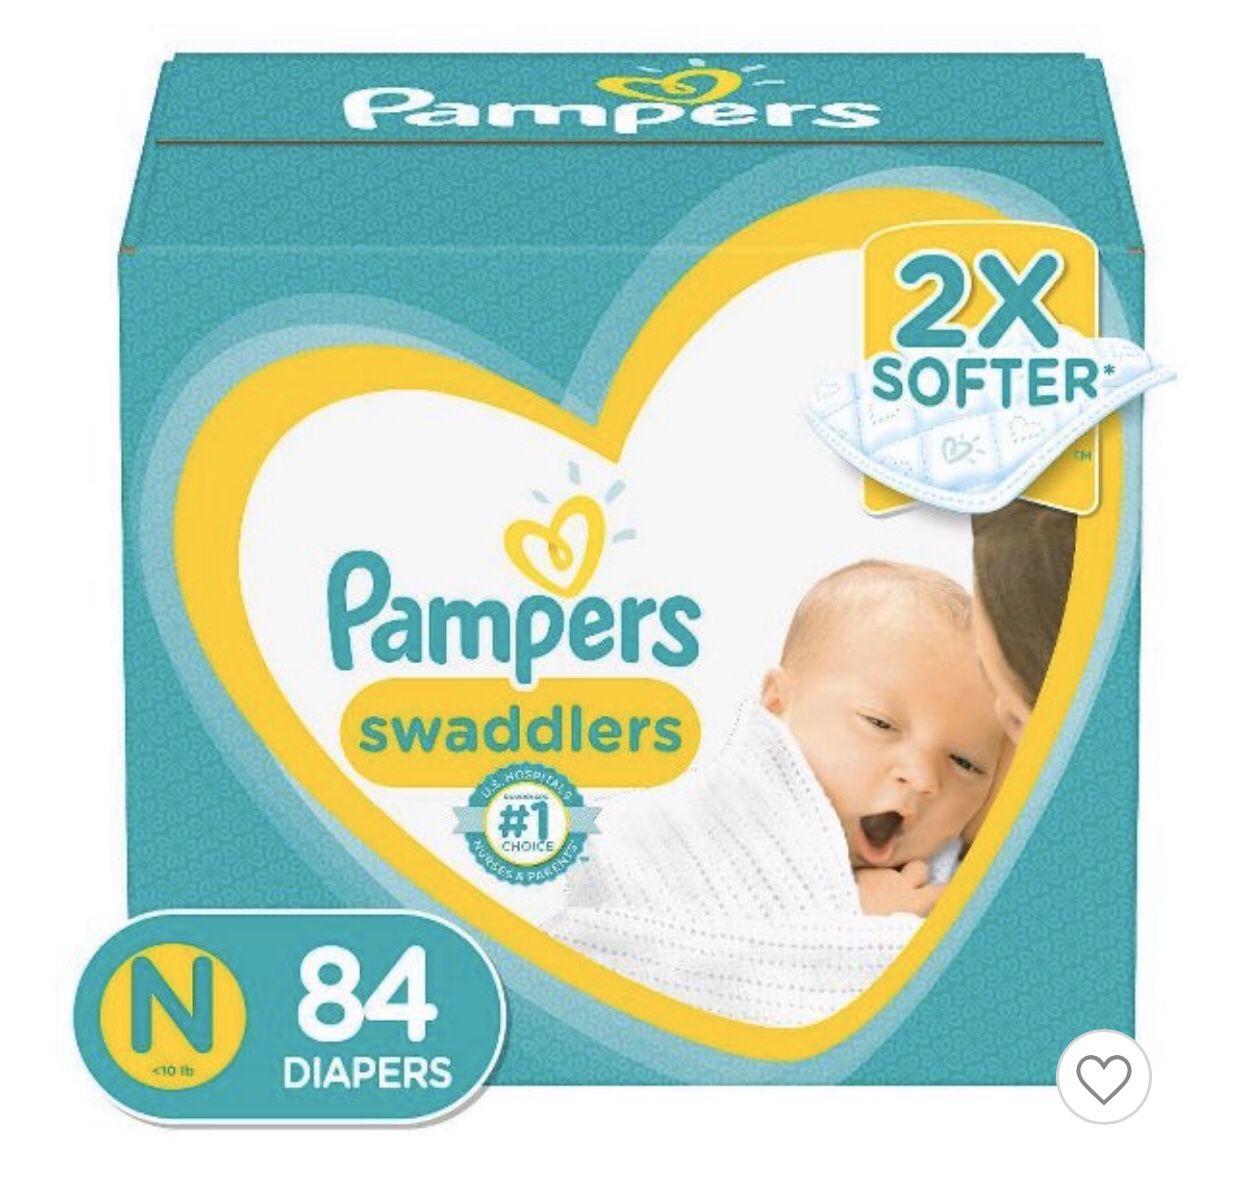 Brand new Pampers Swaddlers